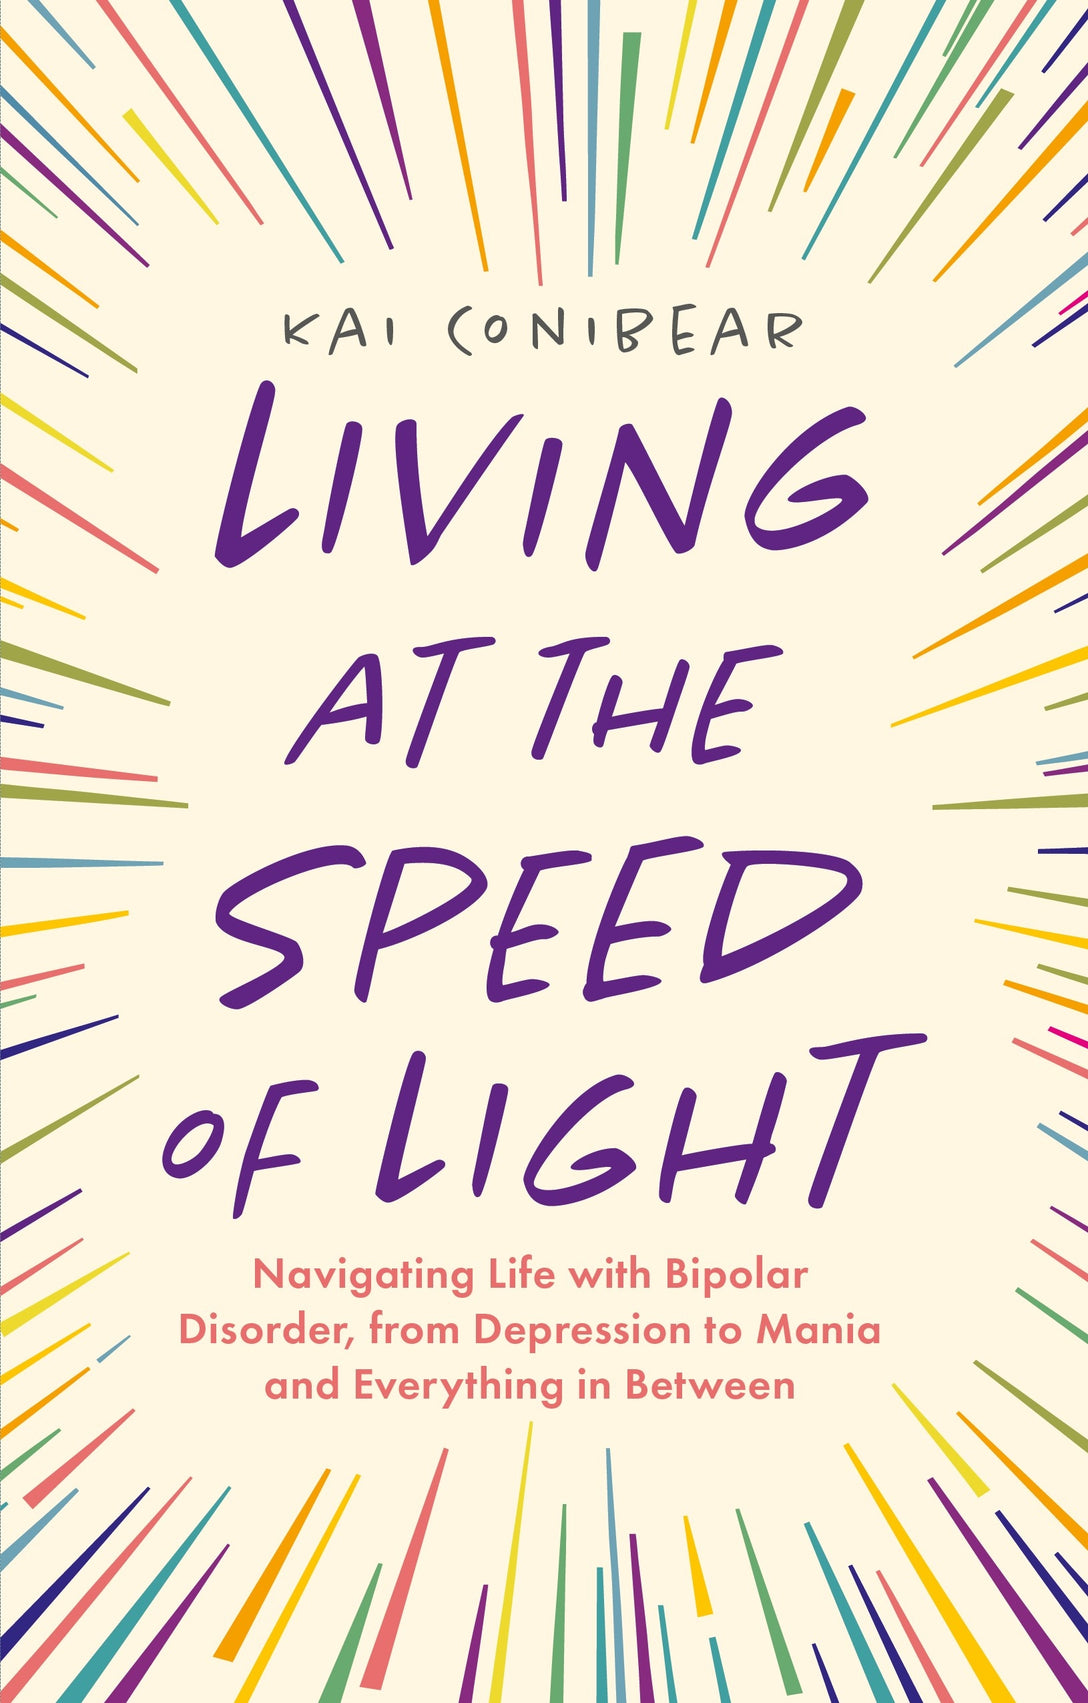 Living at the Speed of Light by Kai Conibear